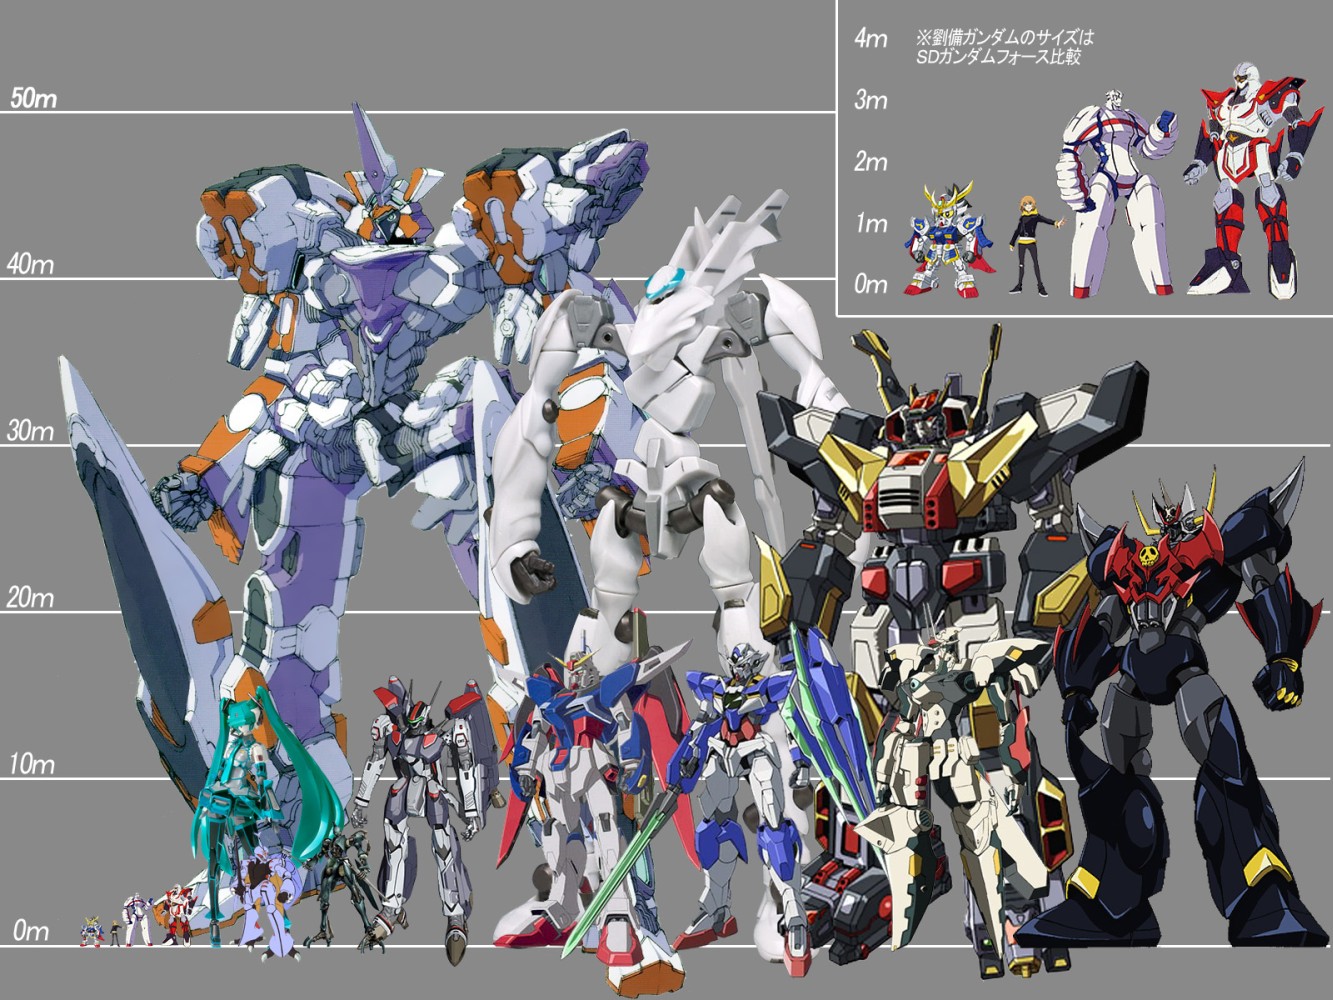 dumping some mecha size comparisons. - #124452658 added by dogziller at  perspective on scale